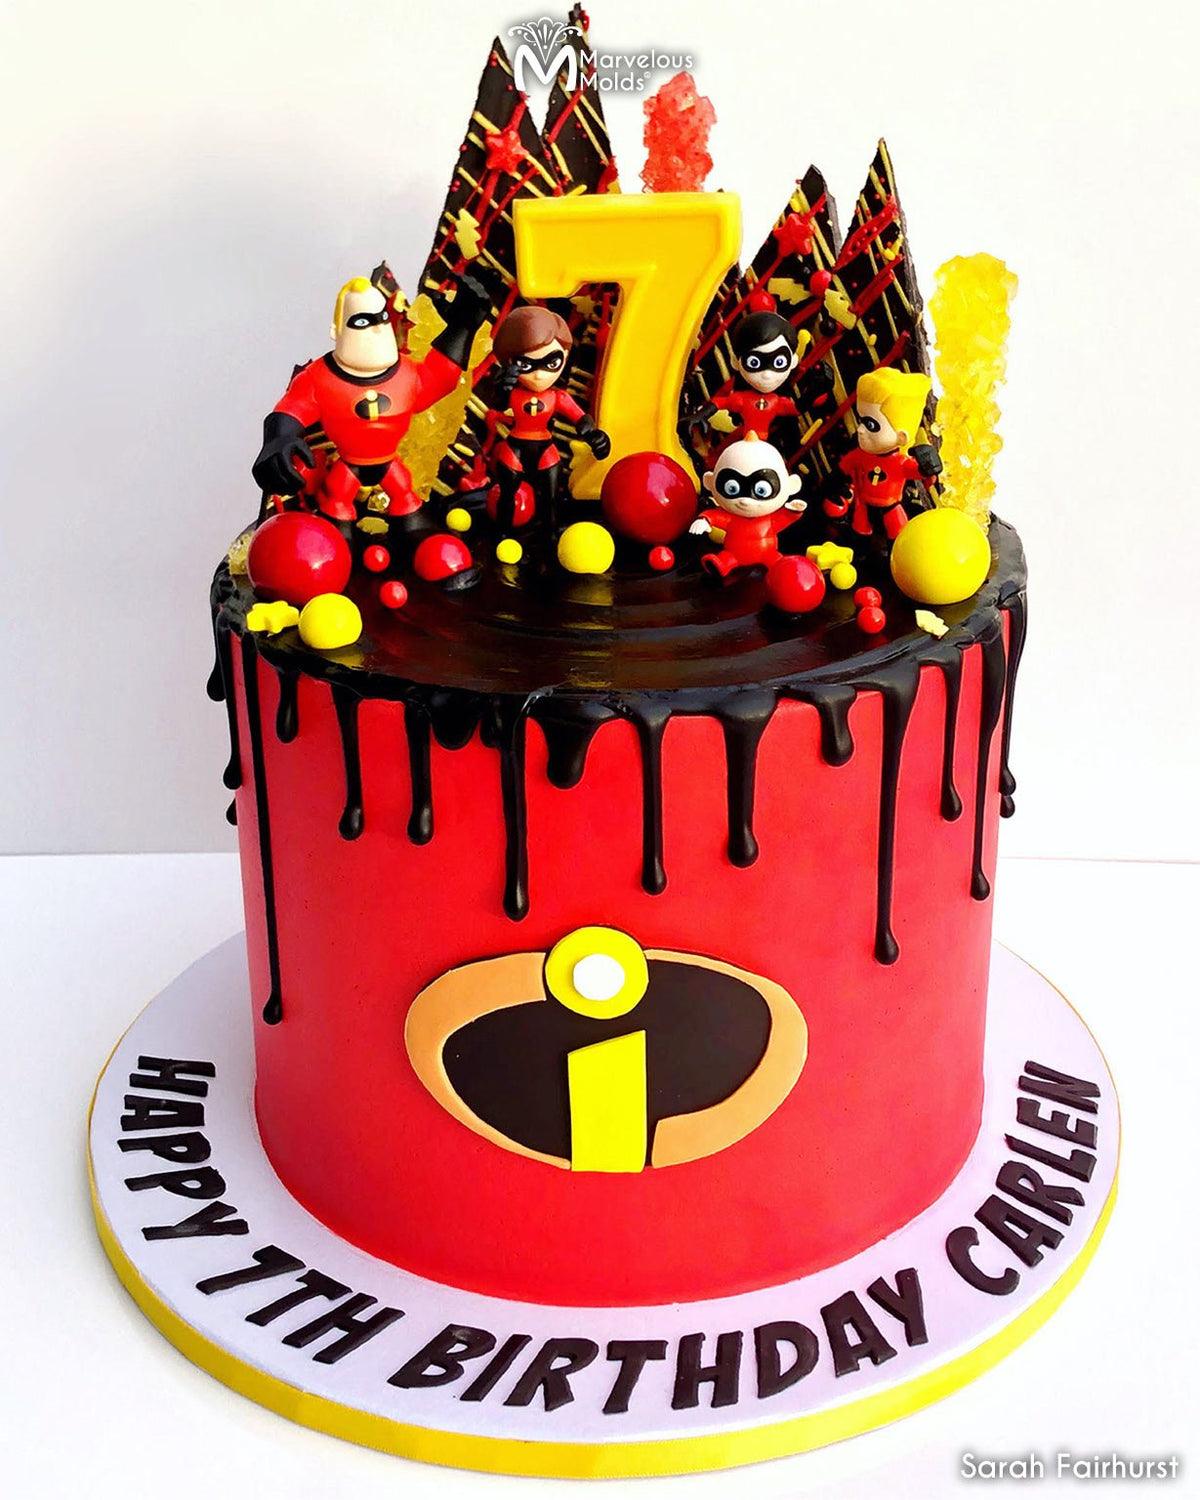 The Incredibles Birthday Cake using Small Action Comic Flexabet by Marvelous Molds